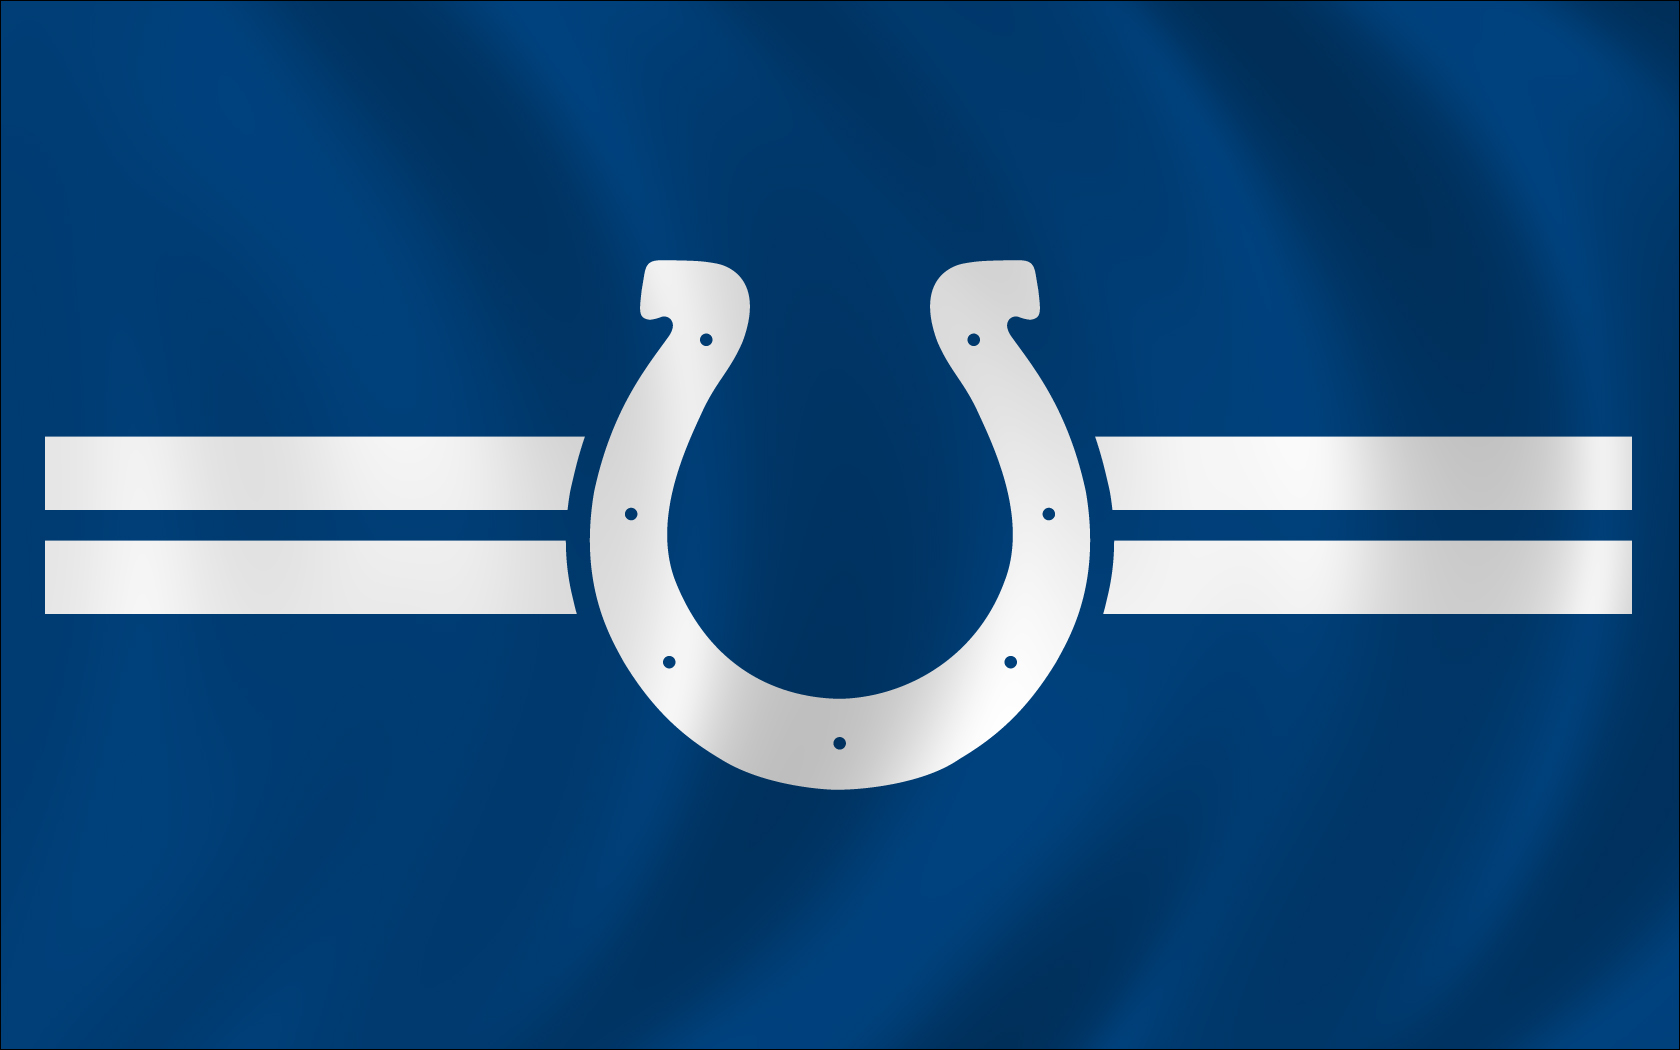 Indianapolis Colts Wallpapers  Top 24 Best Indianapolis Colts Wallpapers   HQ 